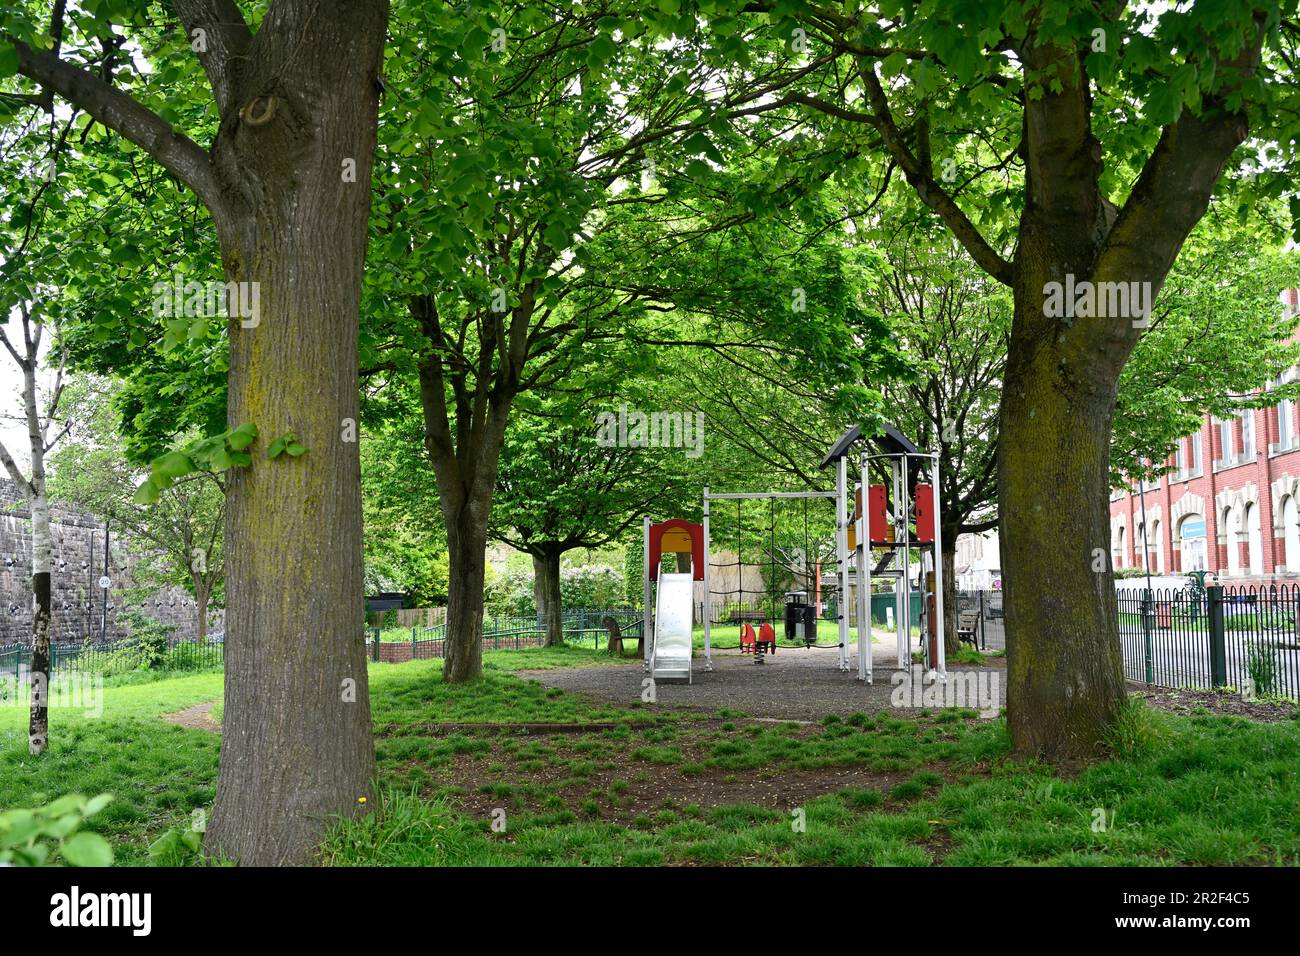 A central city small pocket park with trees and children's play area in Easton, Bristol, UK Stock Photo